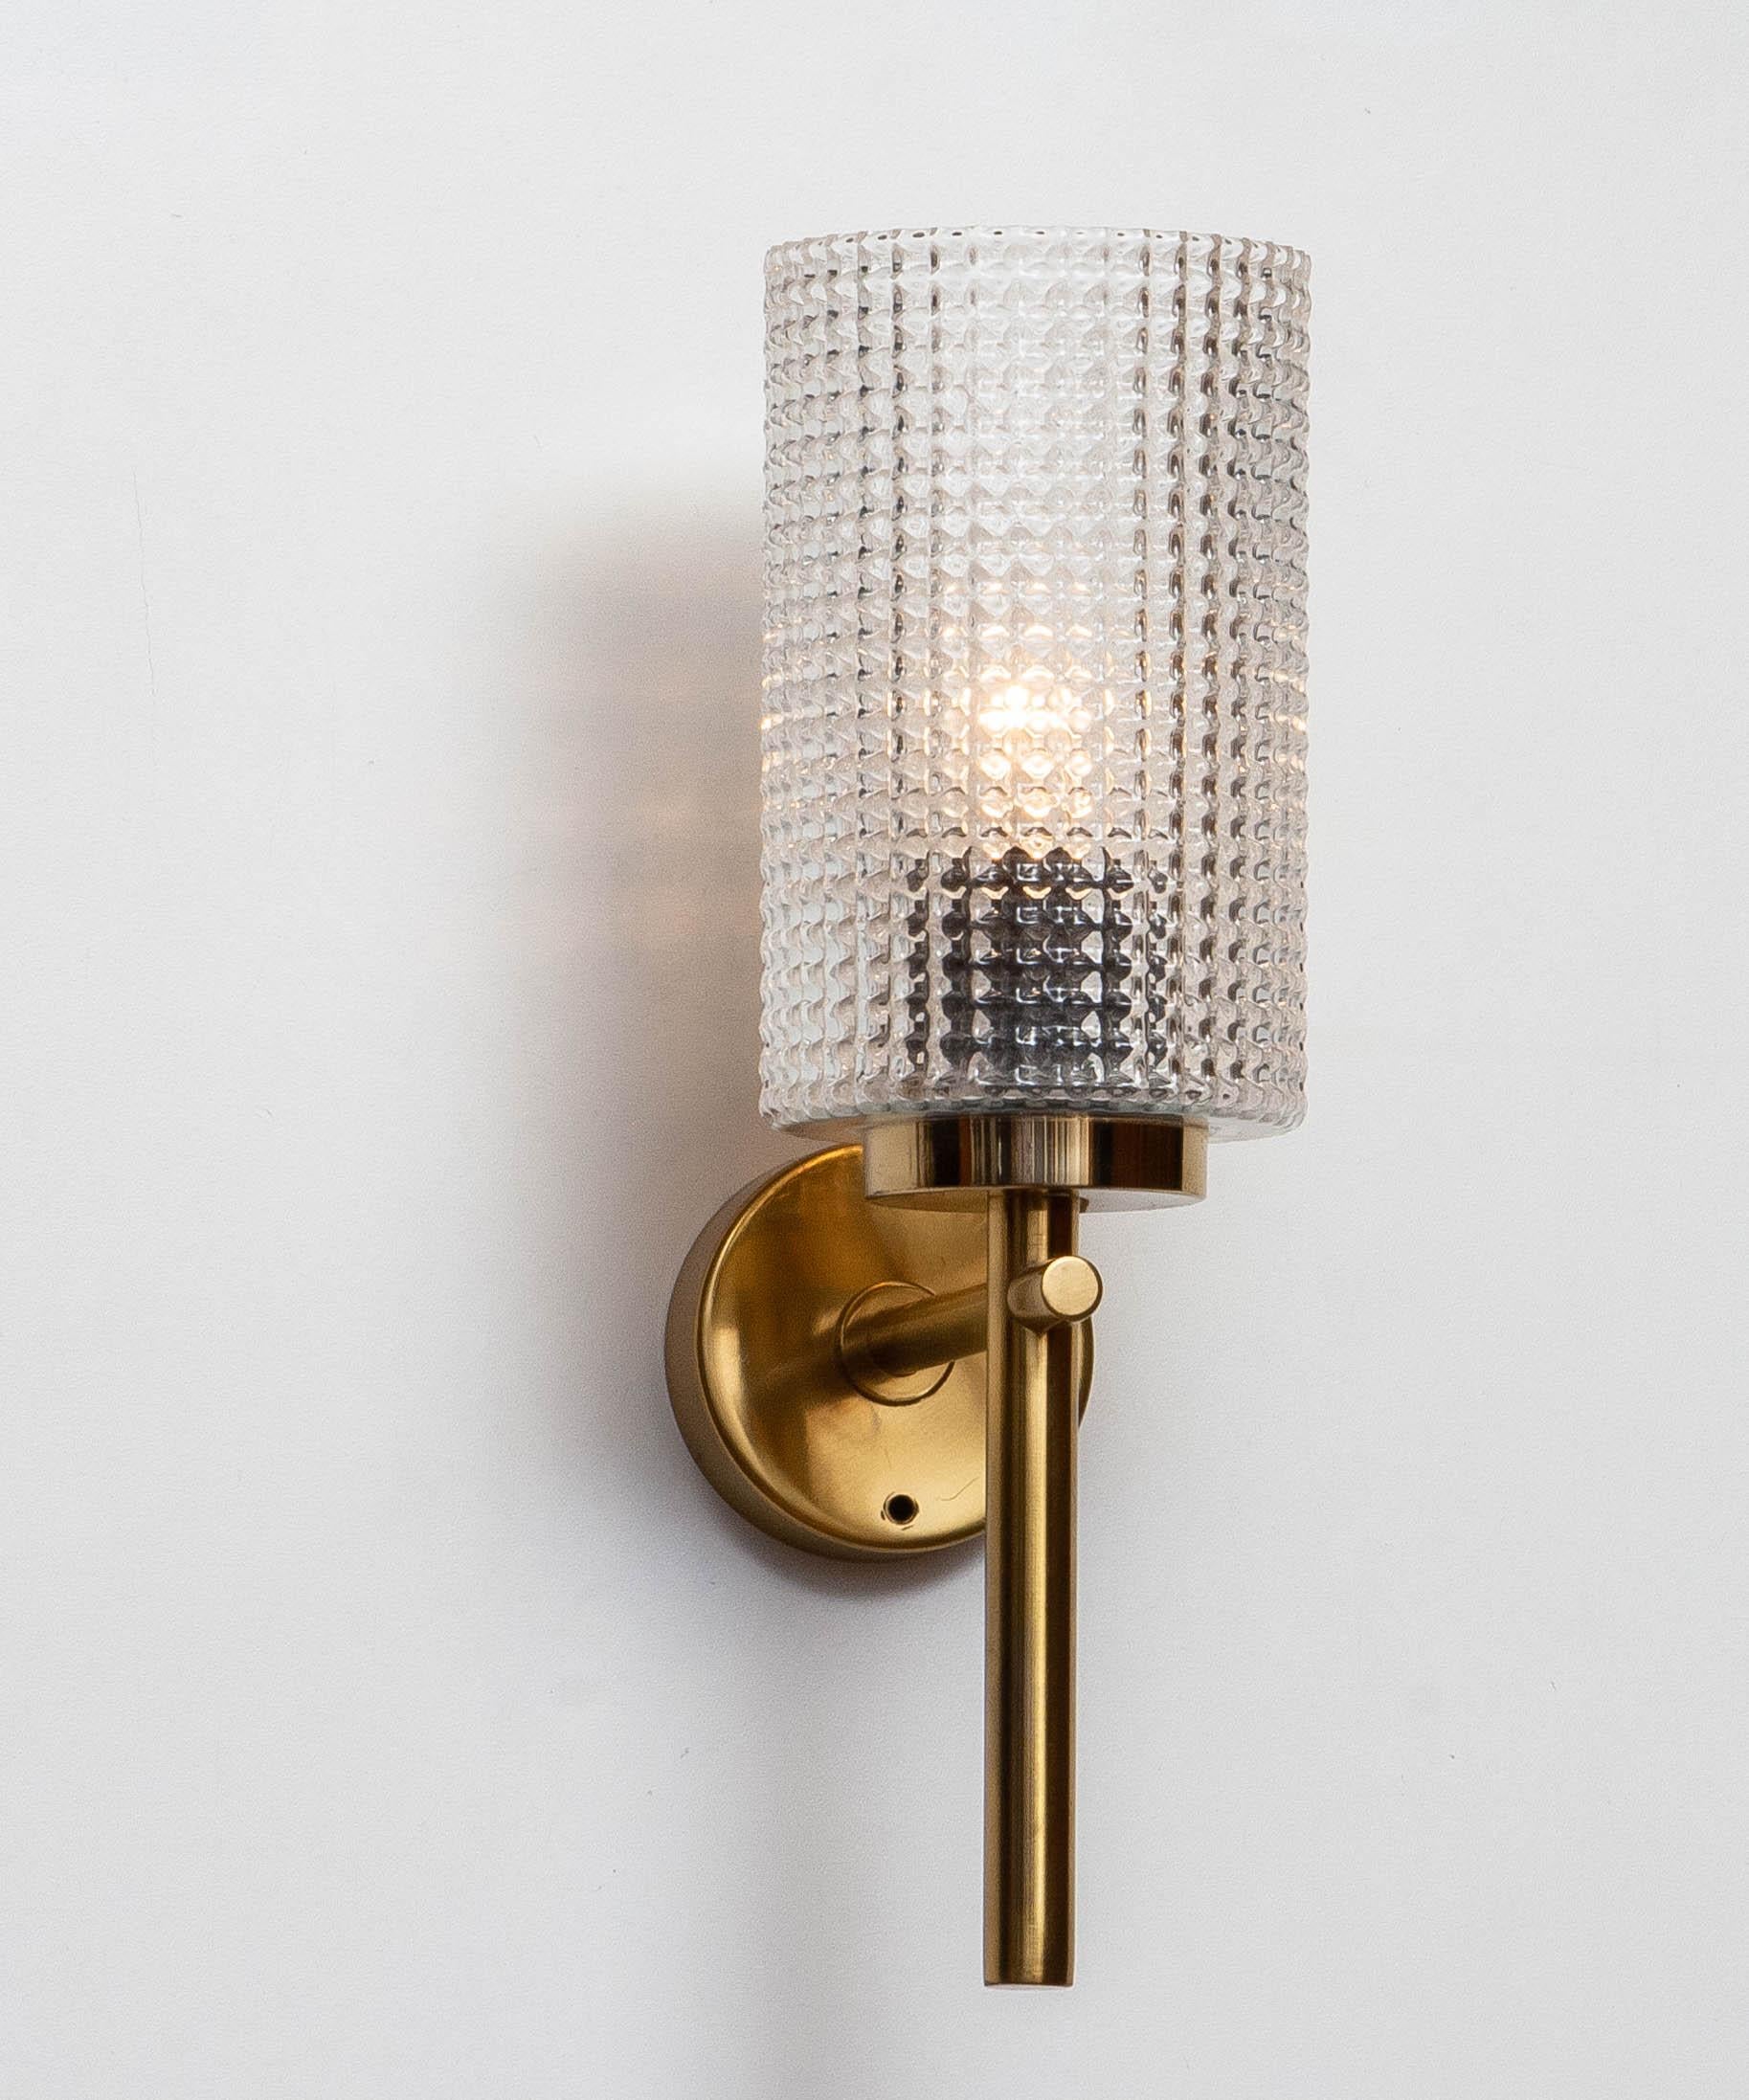 1960s Pair Swedish Brass Wall Lights / Sconces by Carl Fagerlund for Orrefors In Good Condition In Silvolde, Gelderland